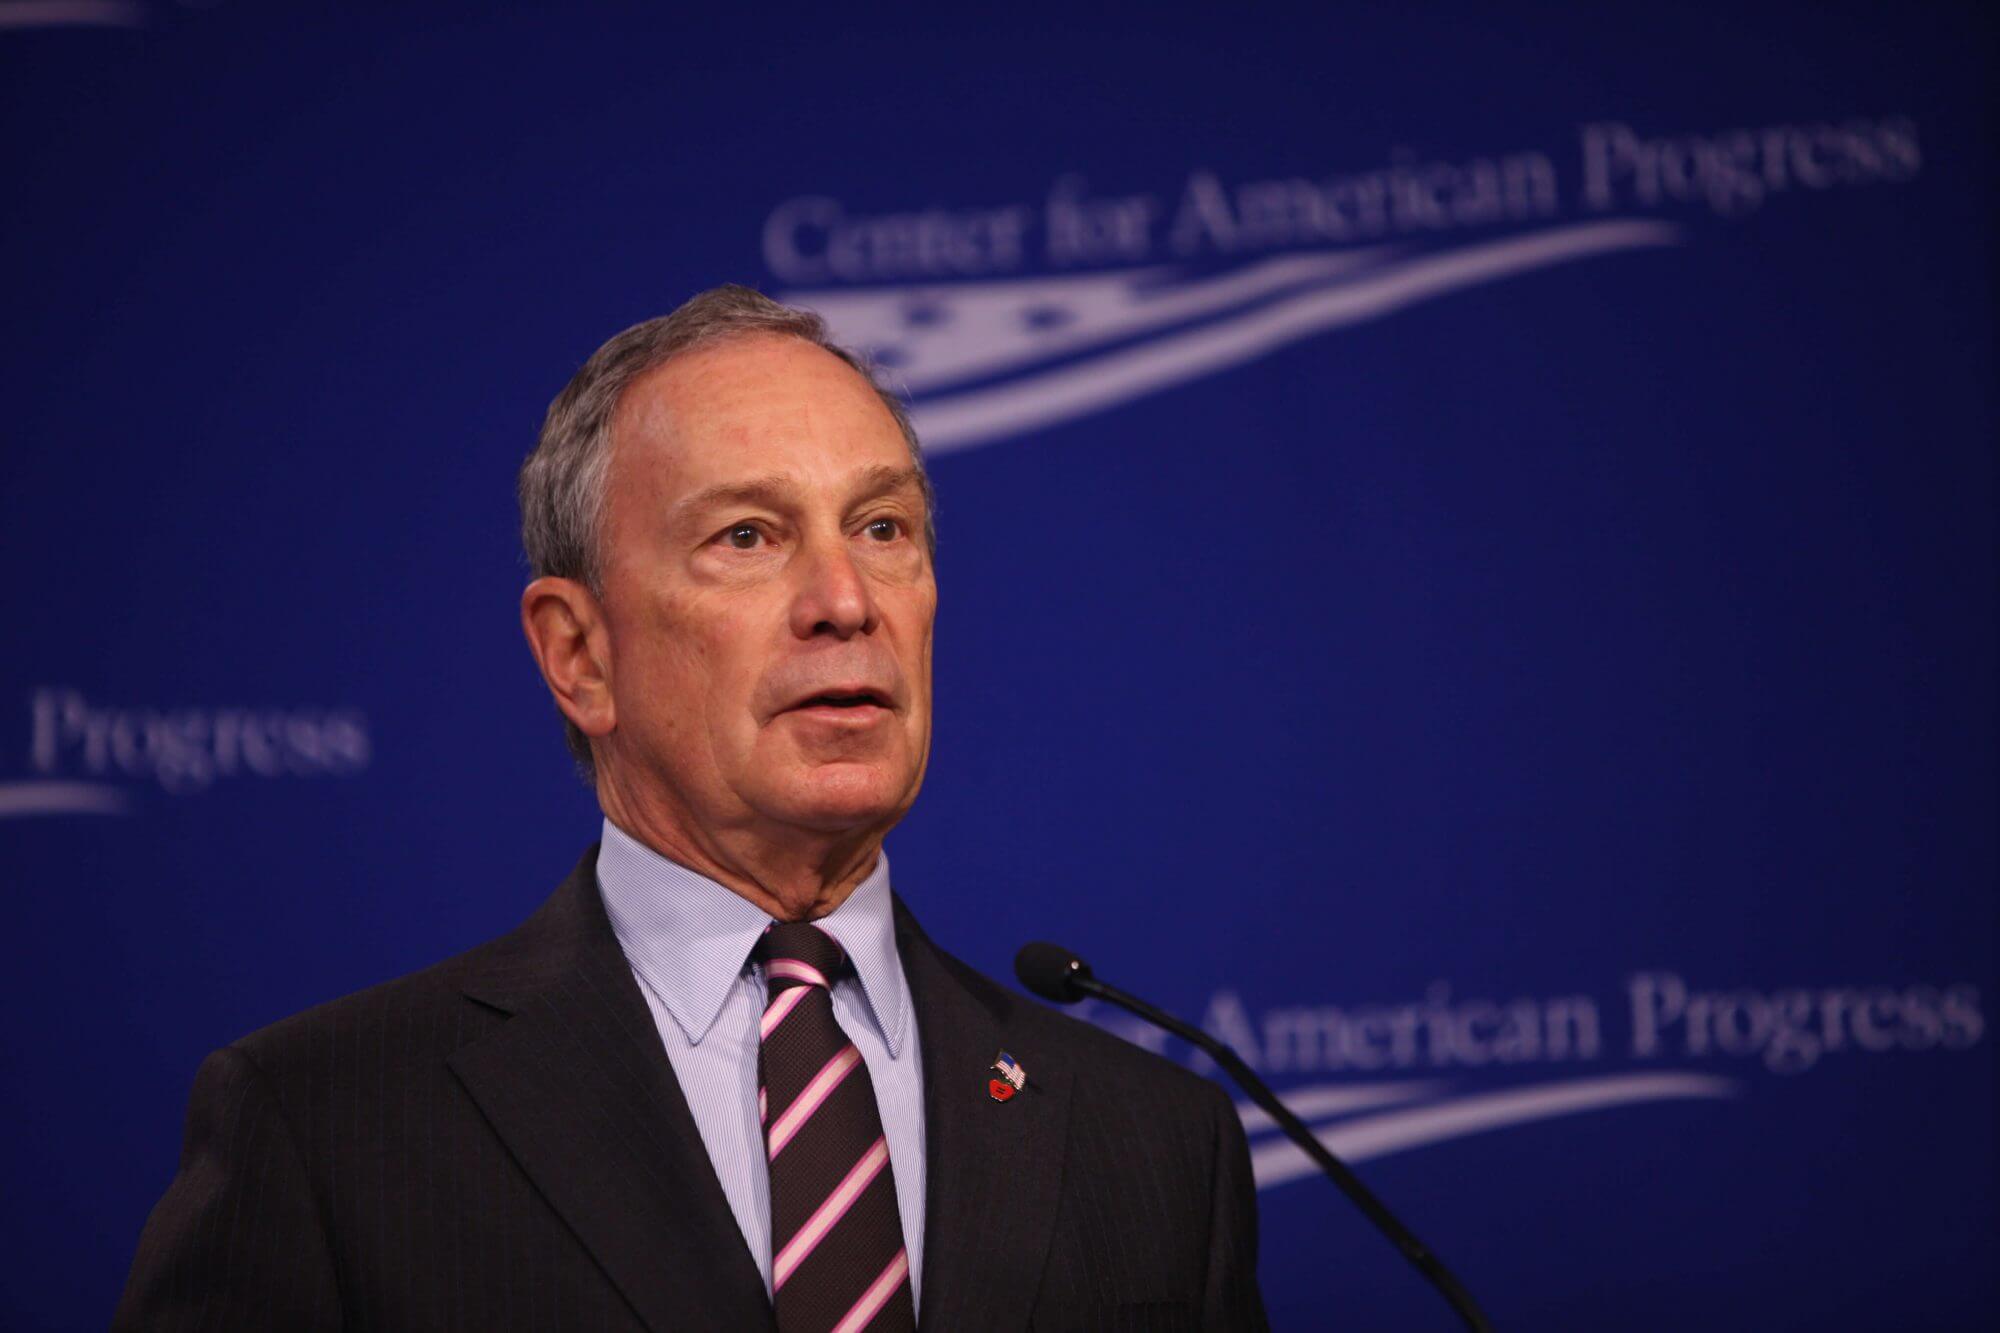 A Bloomberg presidency would have focused on health, experts say